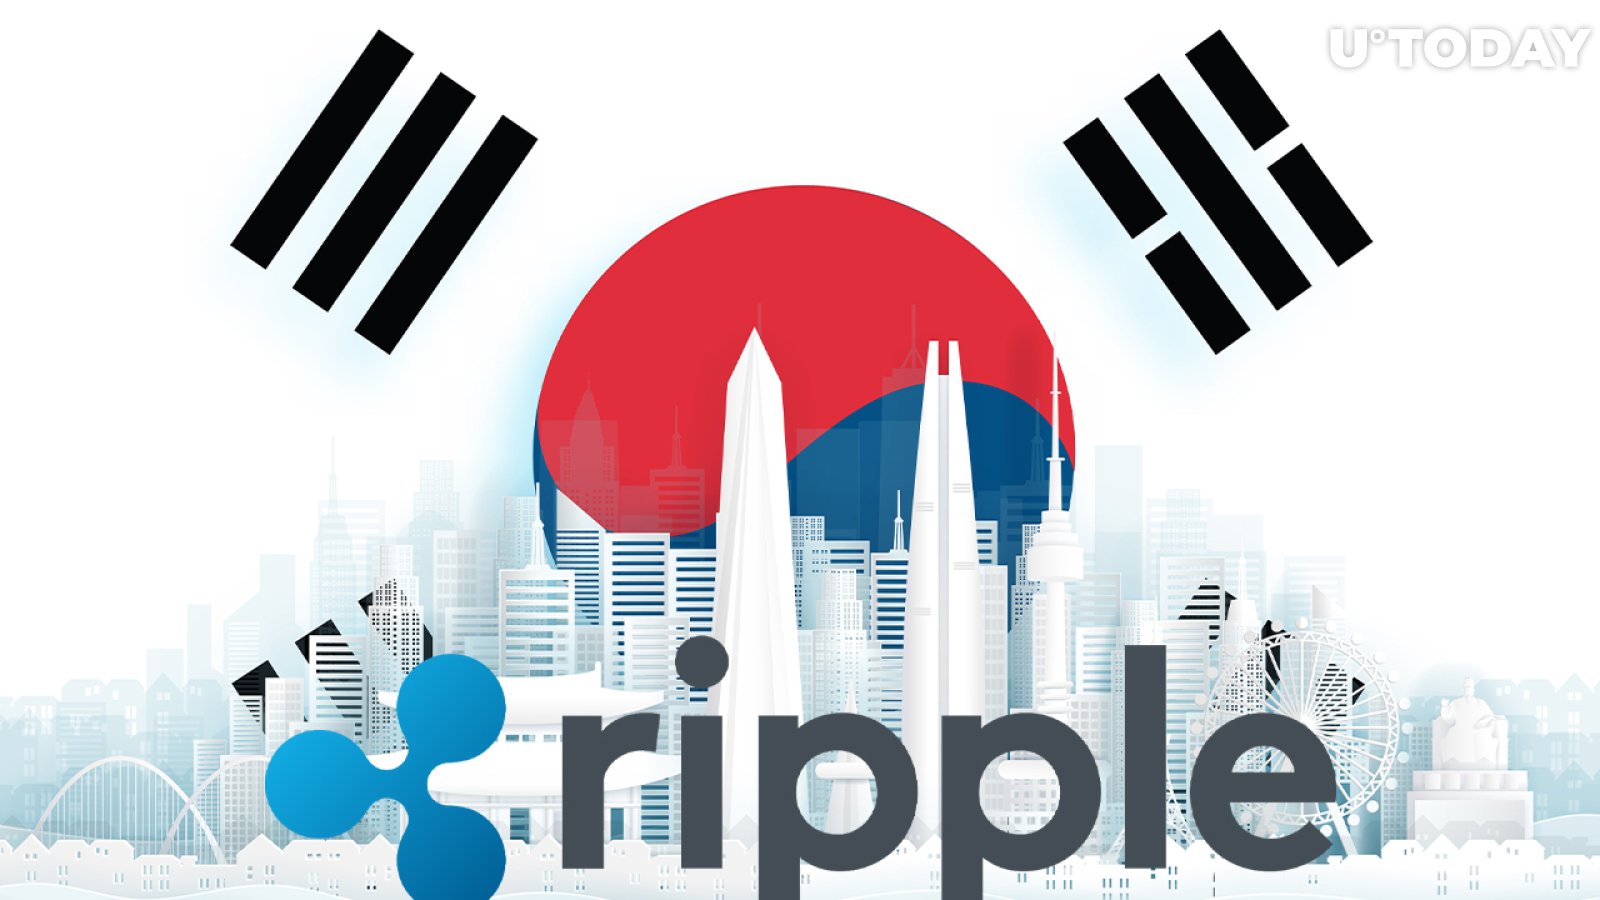 Ripple Plans to Expand to Korean Market Following ODL's Huge Adoption